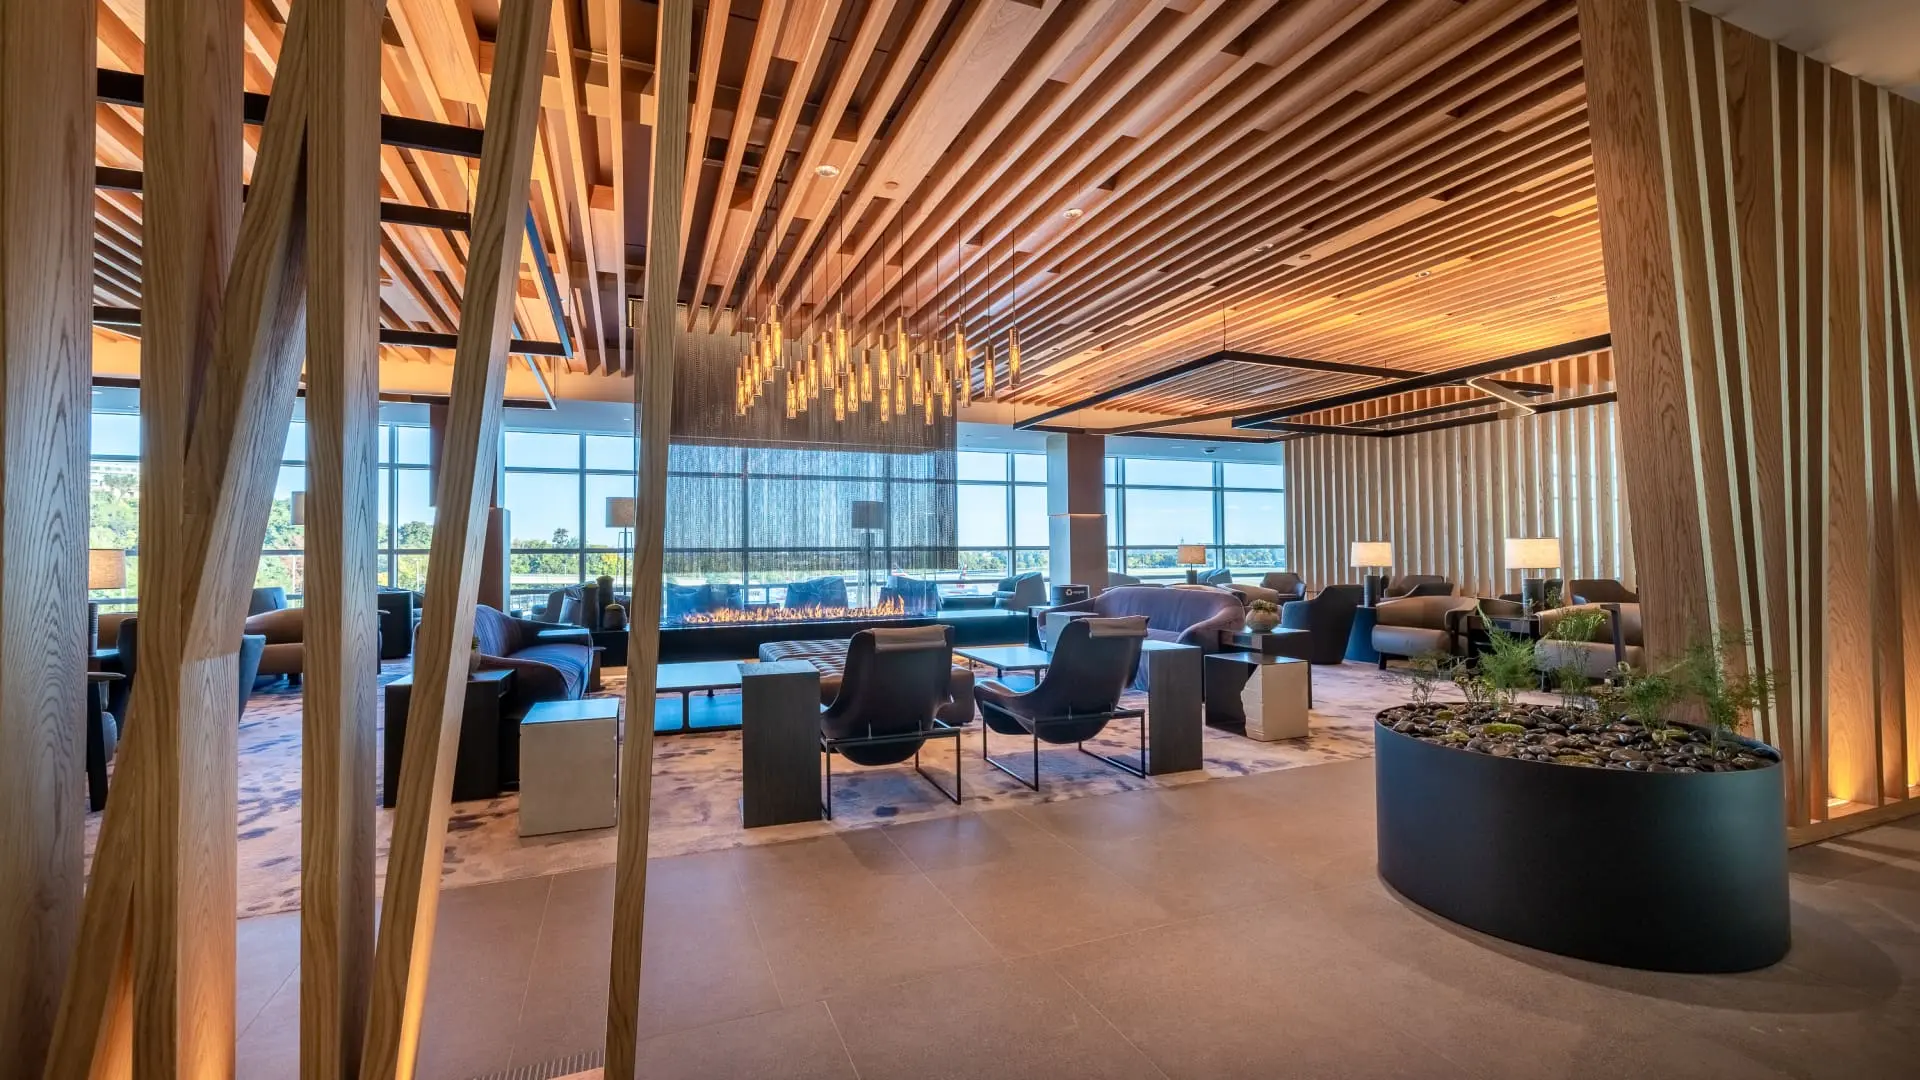 Airlines News - AA First Class lounge returns to London Heathrow T3